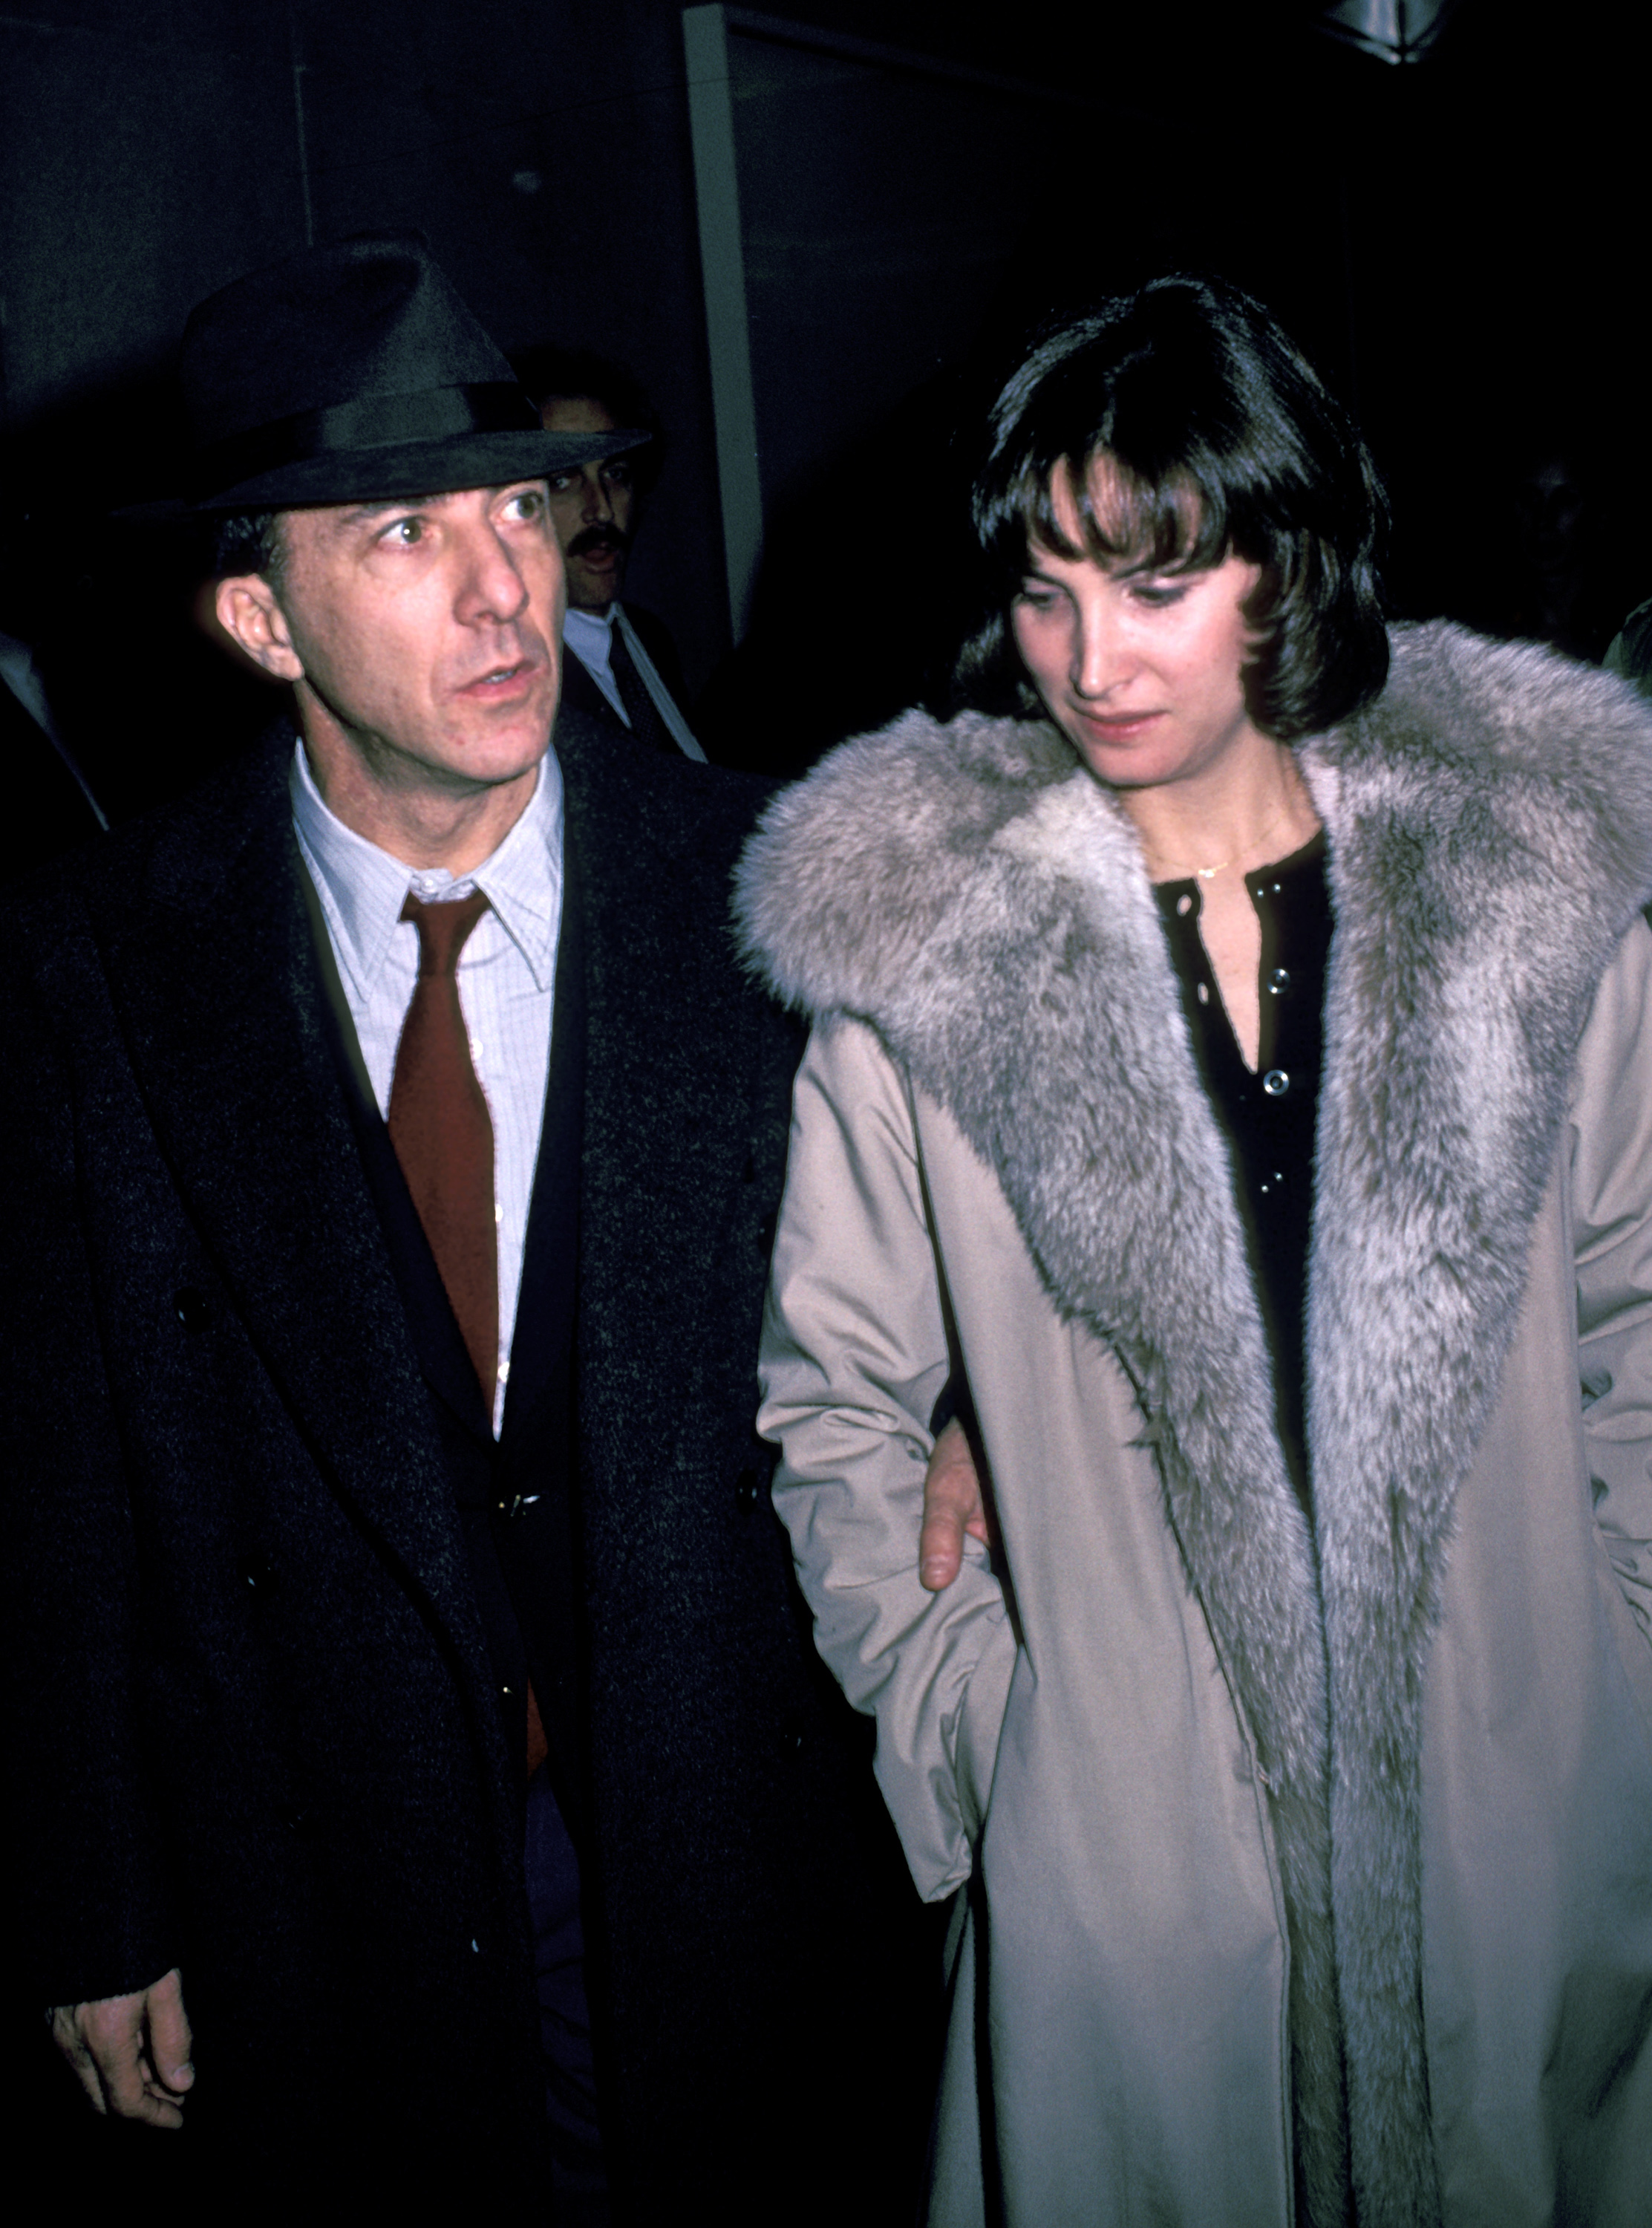 The actor and the woman during "The Falcon and The Snowman" New York City screening in New York City on January 28, 1985. | Source: Getty Images